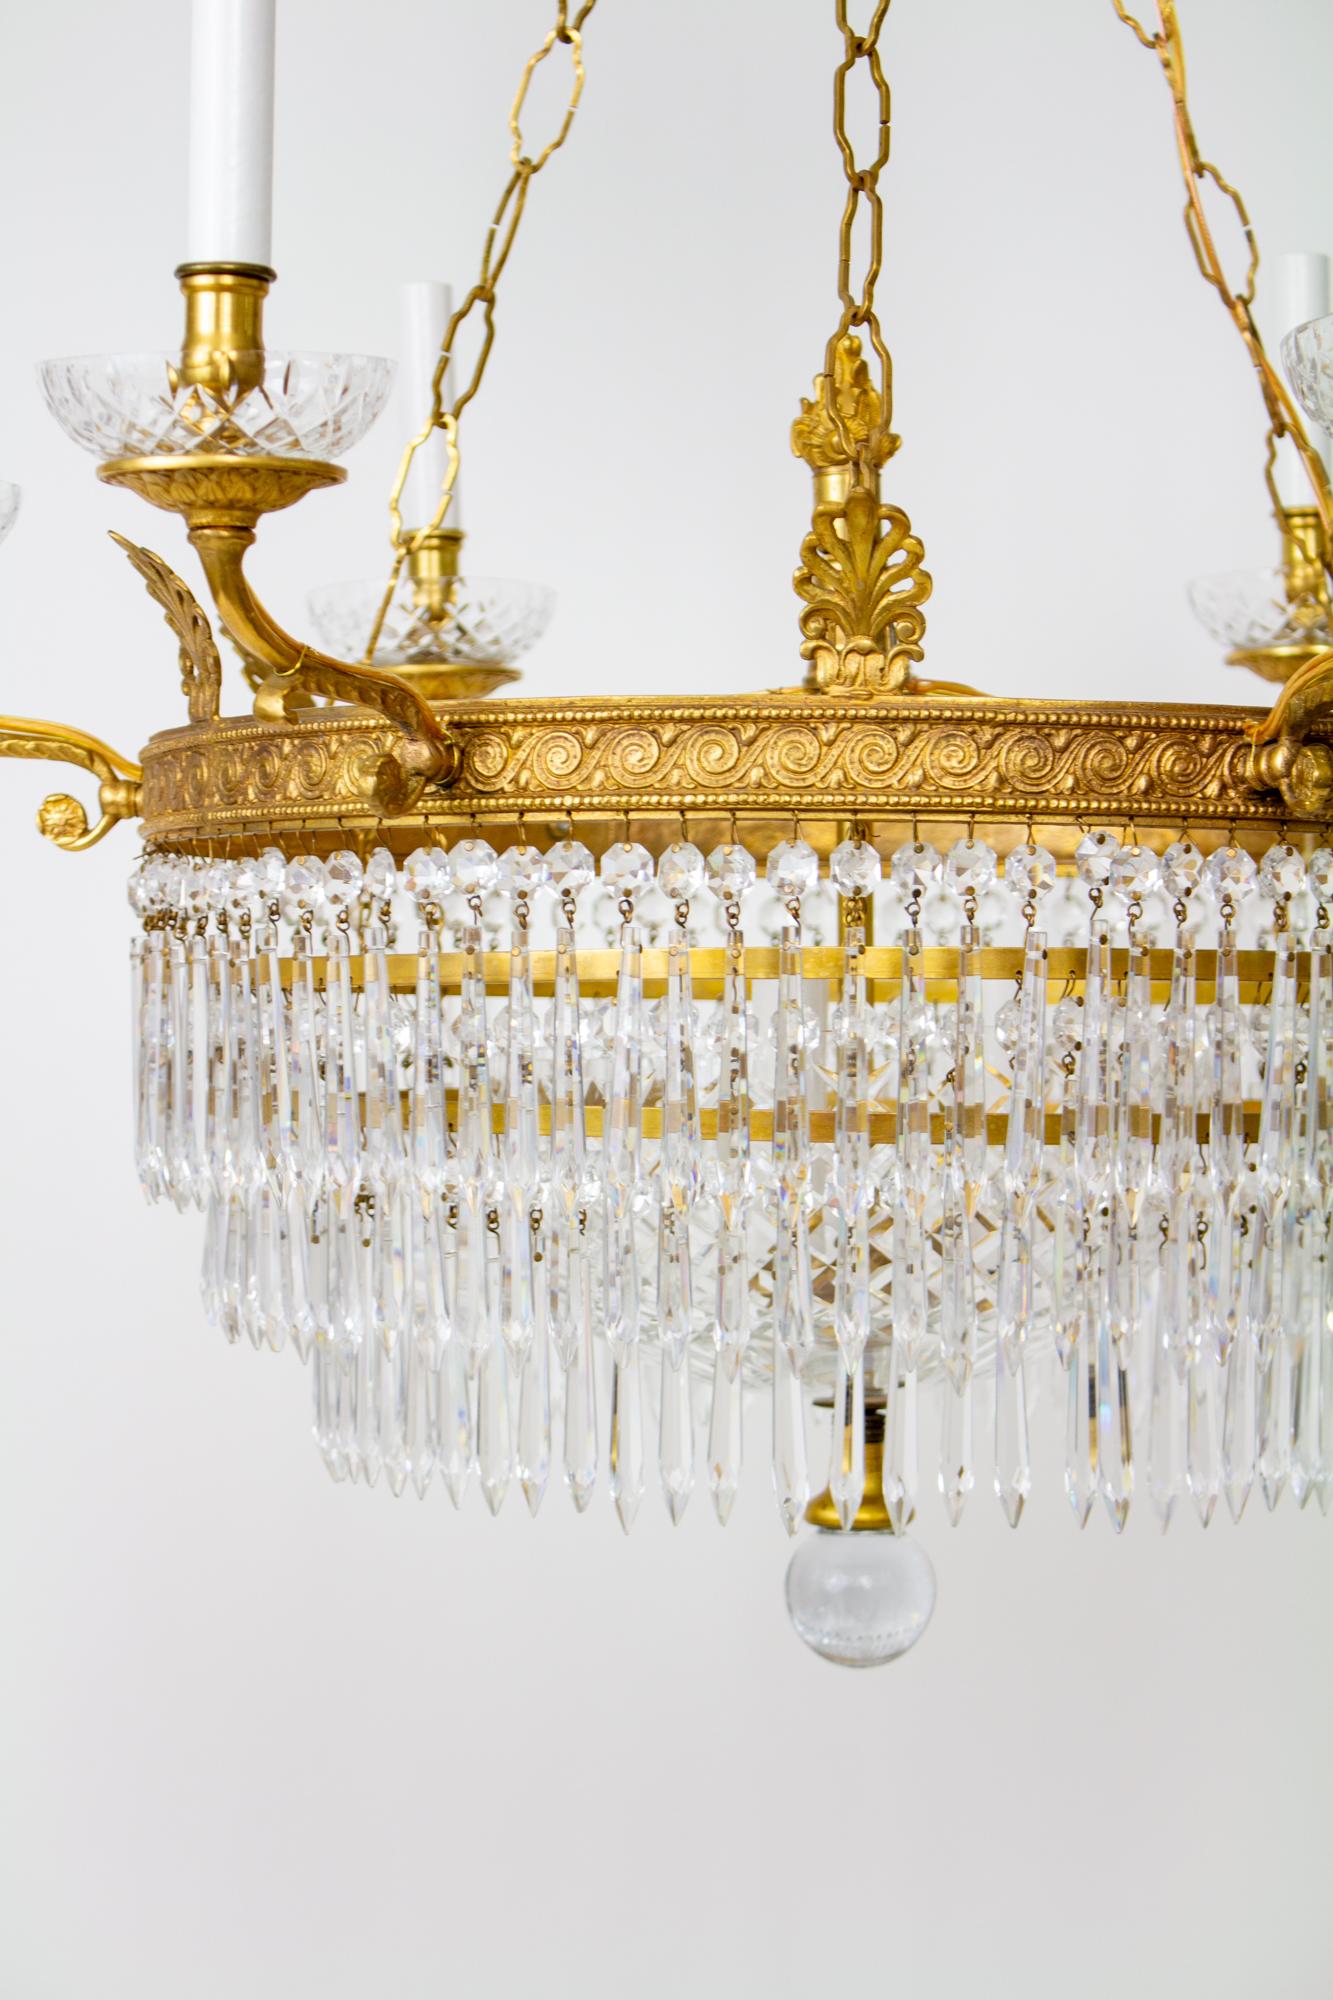 Six arm brass and crystal empire style chandelier. Gilt brass with Crystals. Central brass ring with classical wave cast design. Six arms extend from the central ring with cast design, cut crystal bobeches and candelabra sockets with candlecovers.